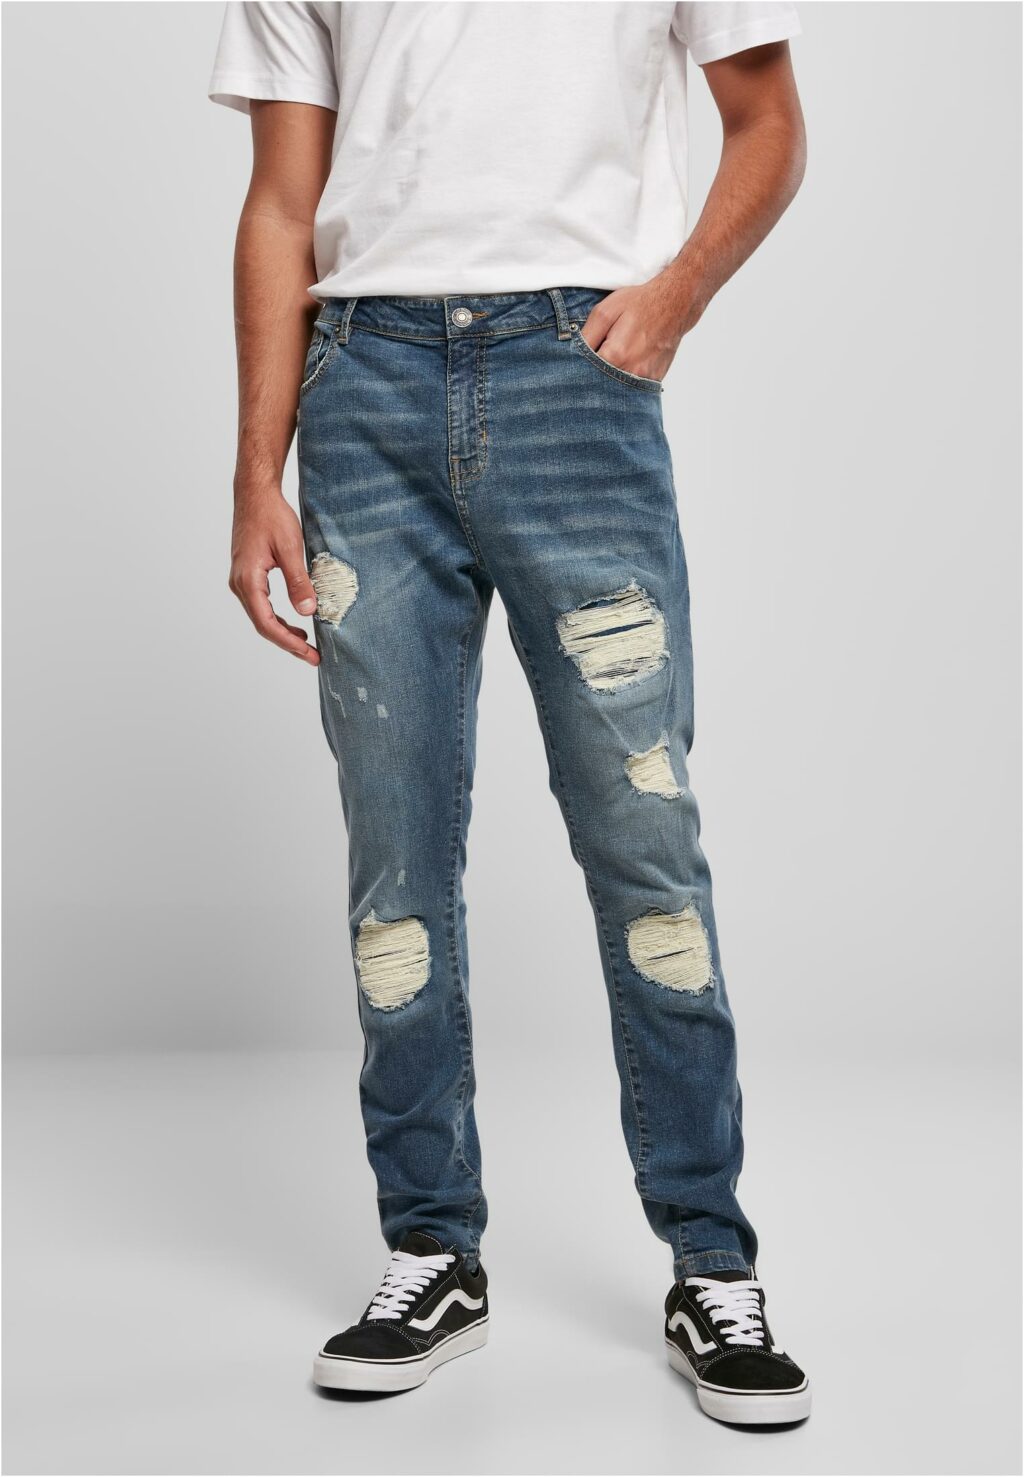 Urban Classics Heavy Destroyed Slim Fit Jeans blue heavy destroyed washed TB4661